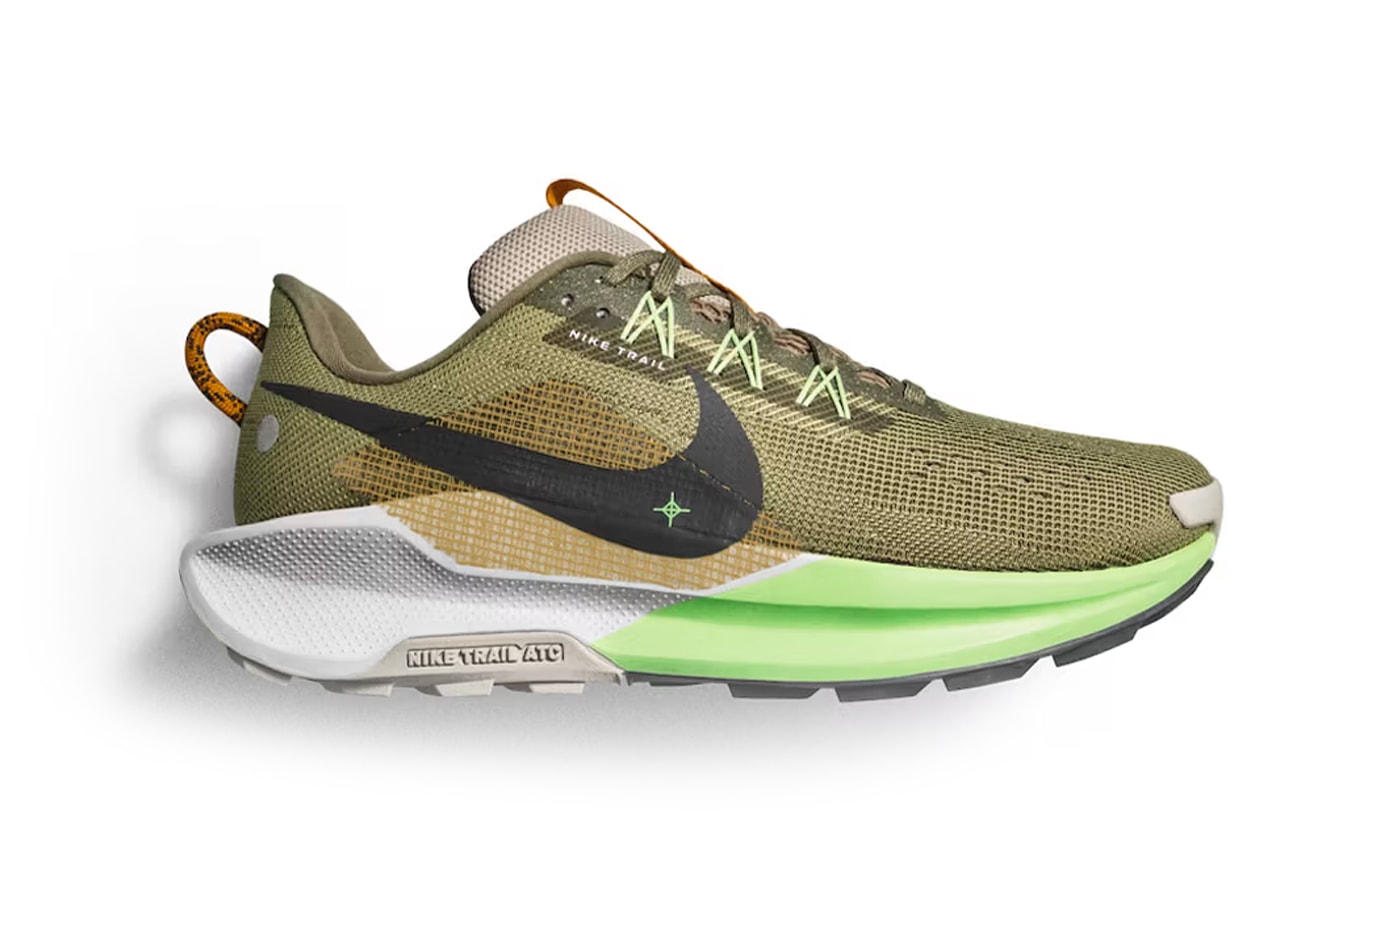 Nike Trail Running Zegama 2 Pegasus Trail 5 shoe sneaker upcoming release details feature midsole outsole preview may 2024